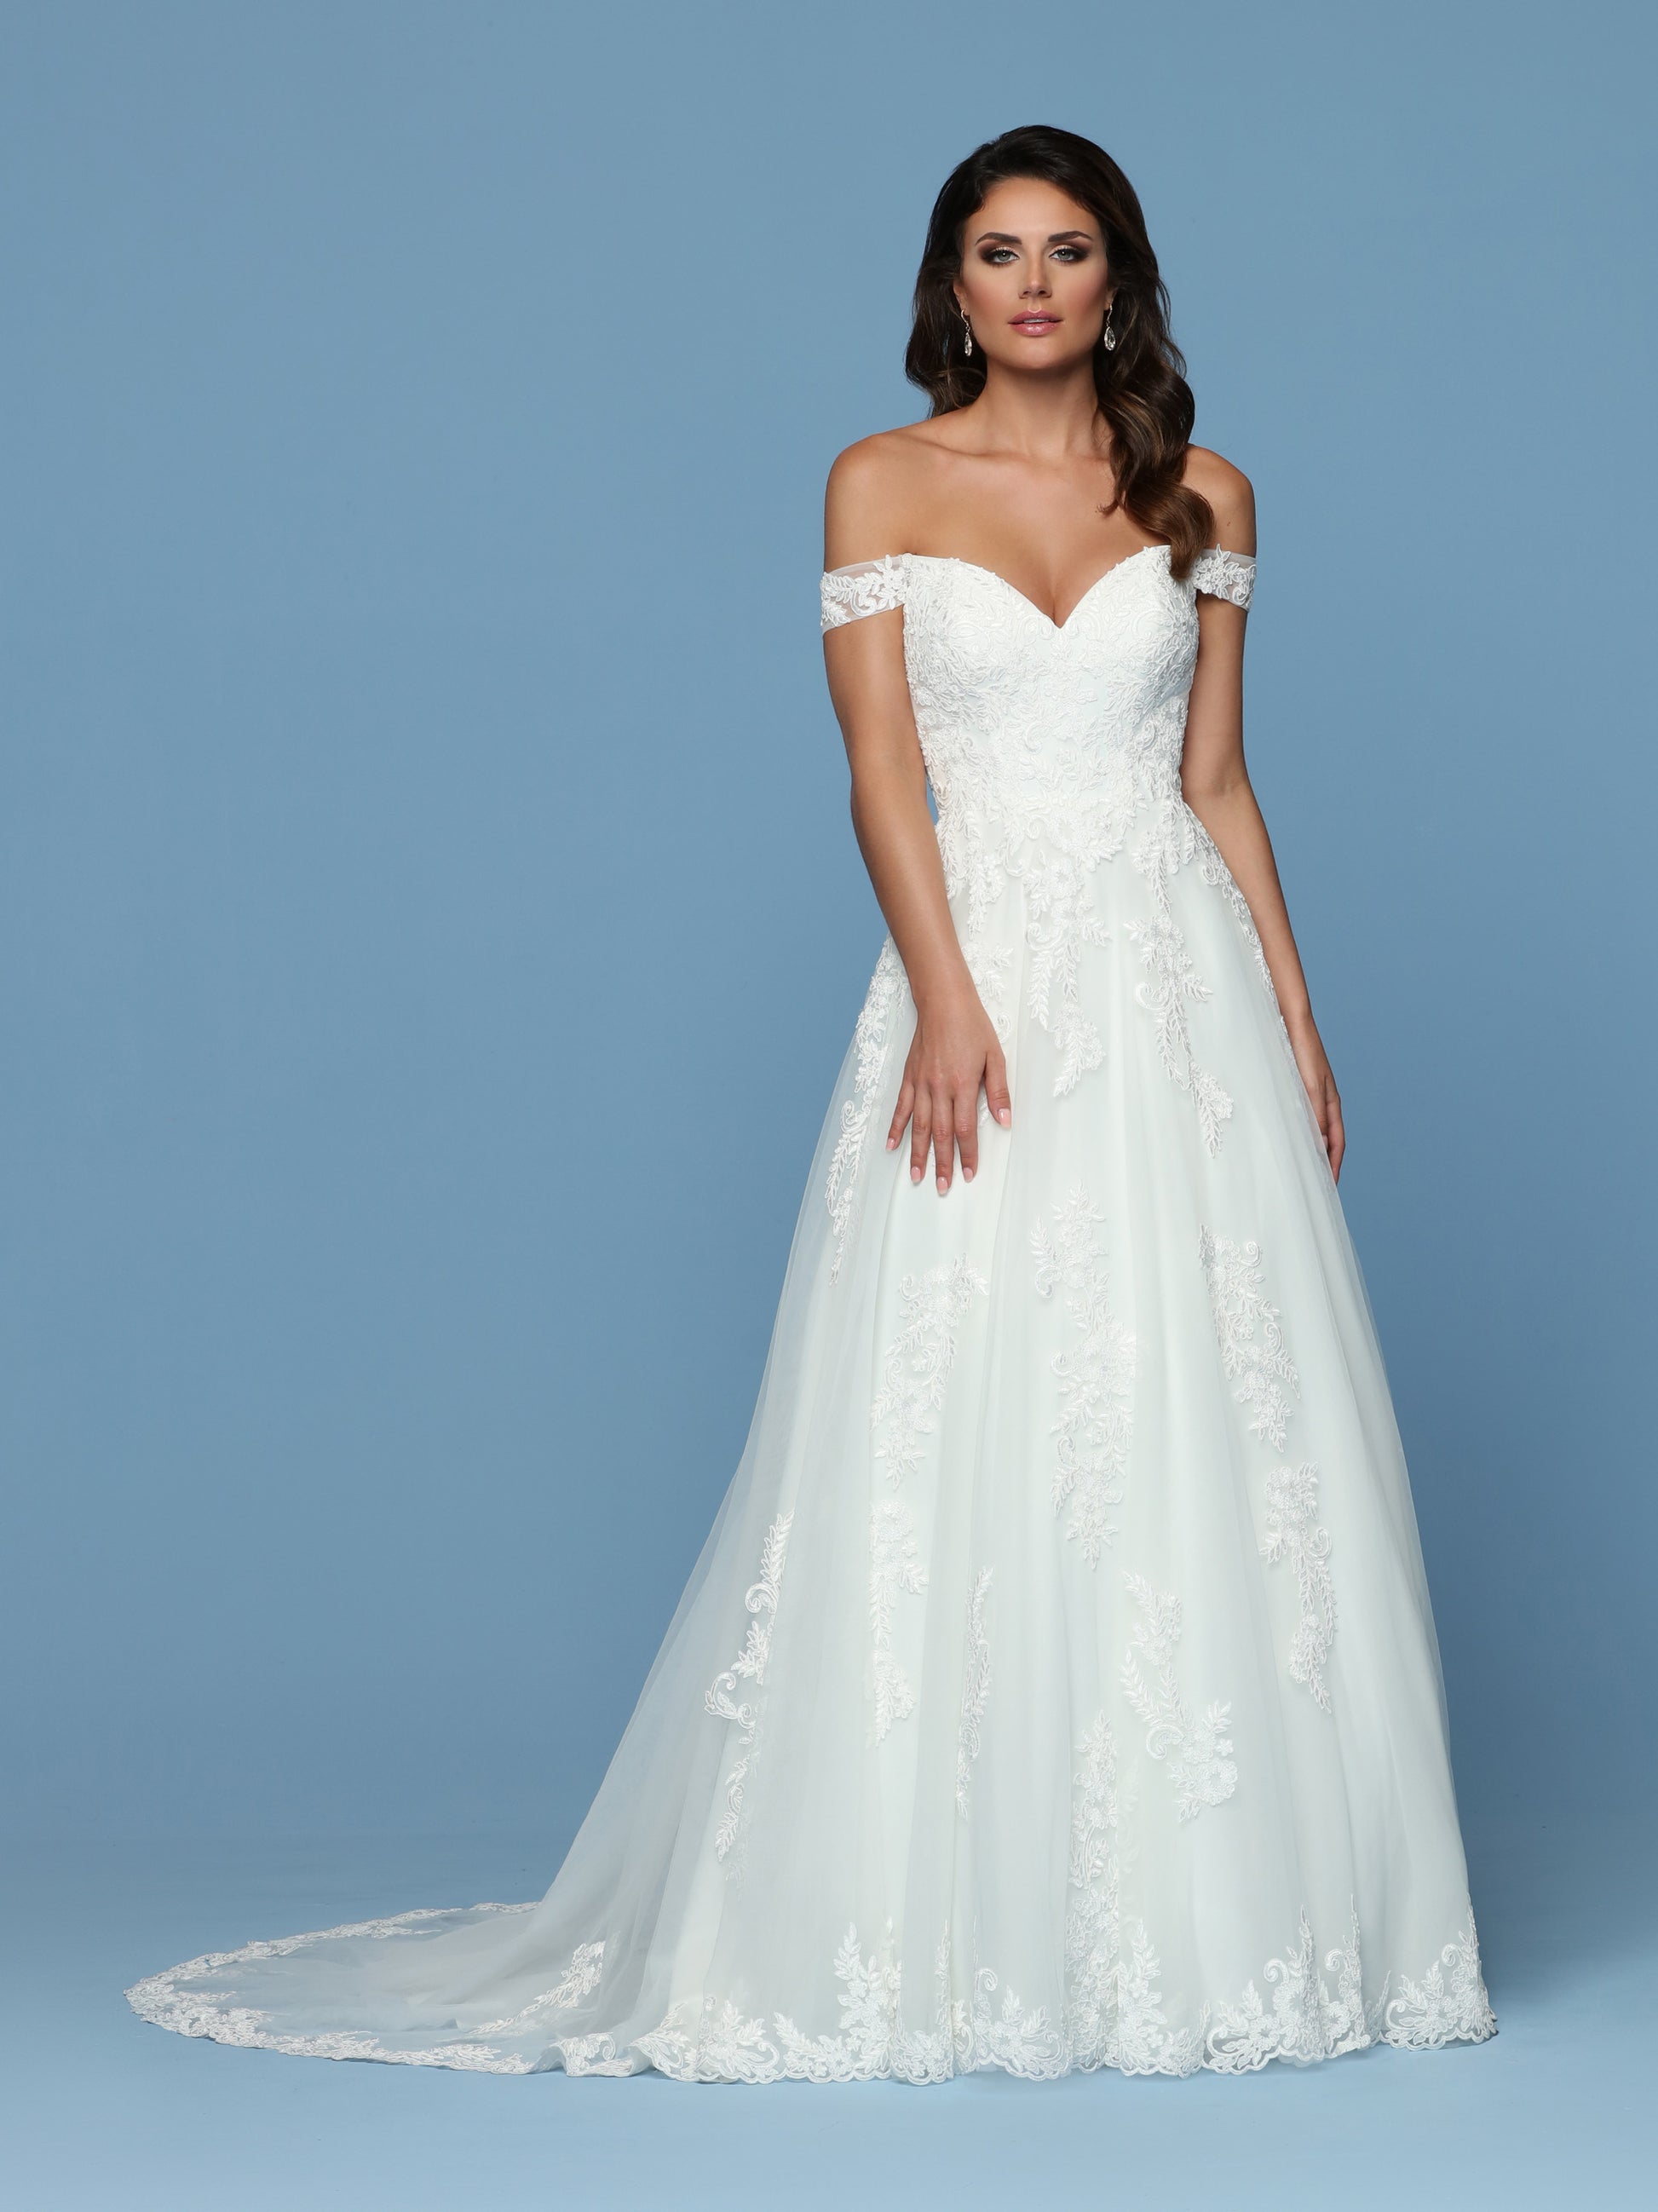 Davinci Bridal 50556 is a Beautiful Tulle & Lace A Line Ballgown Wedding Dress. Featuring an Off the Shoulder Sheer Lace Strap and a strapless sweetheart neckline. The bodice is delicately covered with lace cascading down into the skirt with a lush lace edge around the hem and train.  Available for 1-2 Week Delivery!!!  Available Sizes: 2,4,6,8,10,12,14,16,18,20  Available Colors: Ivory